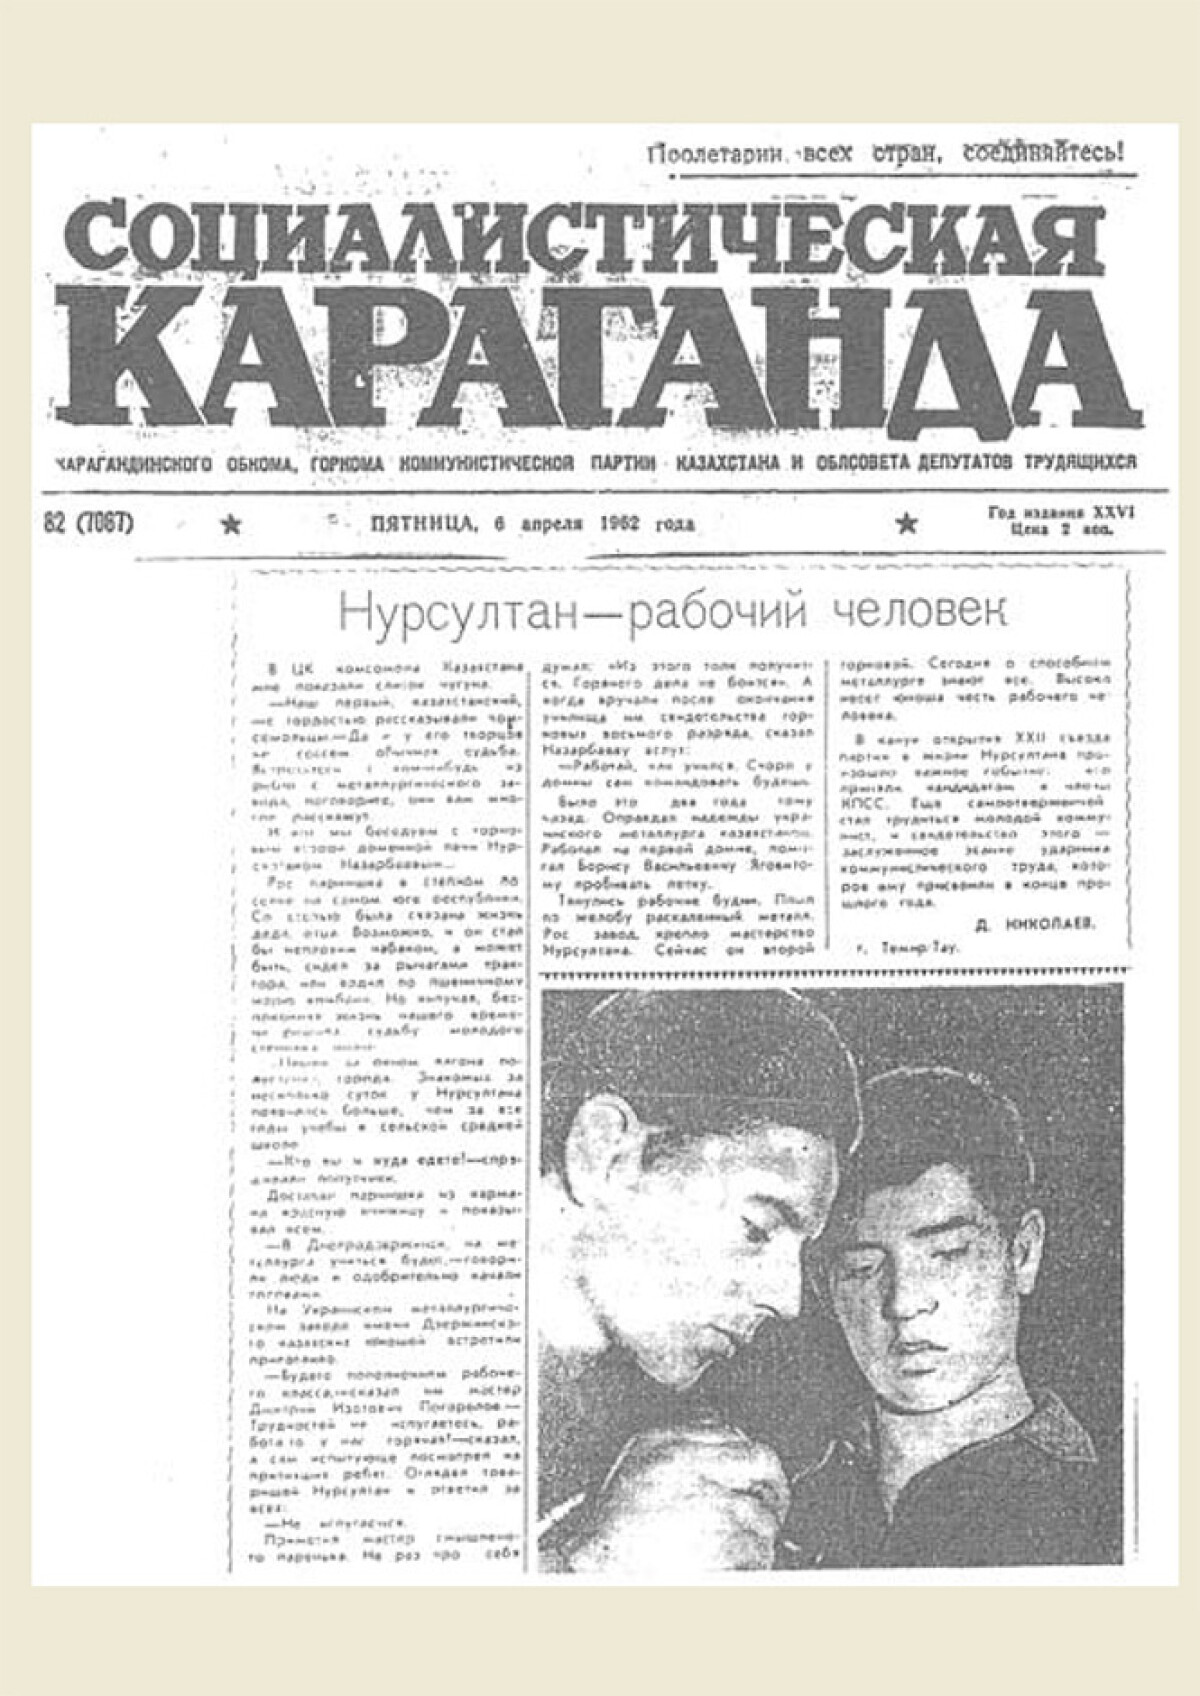 An article about the second blast furnace № 1 Karaganda Metallurgical Factory, workers of communist labor Nursultan Nazarbayev - e-history.kz